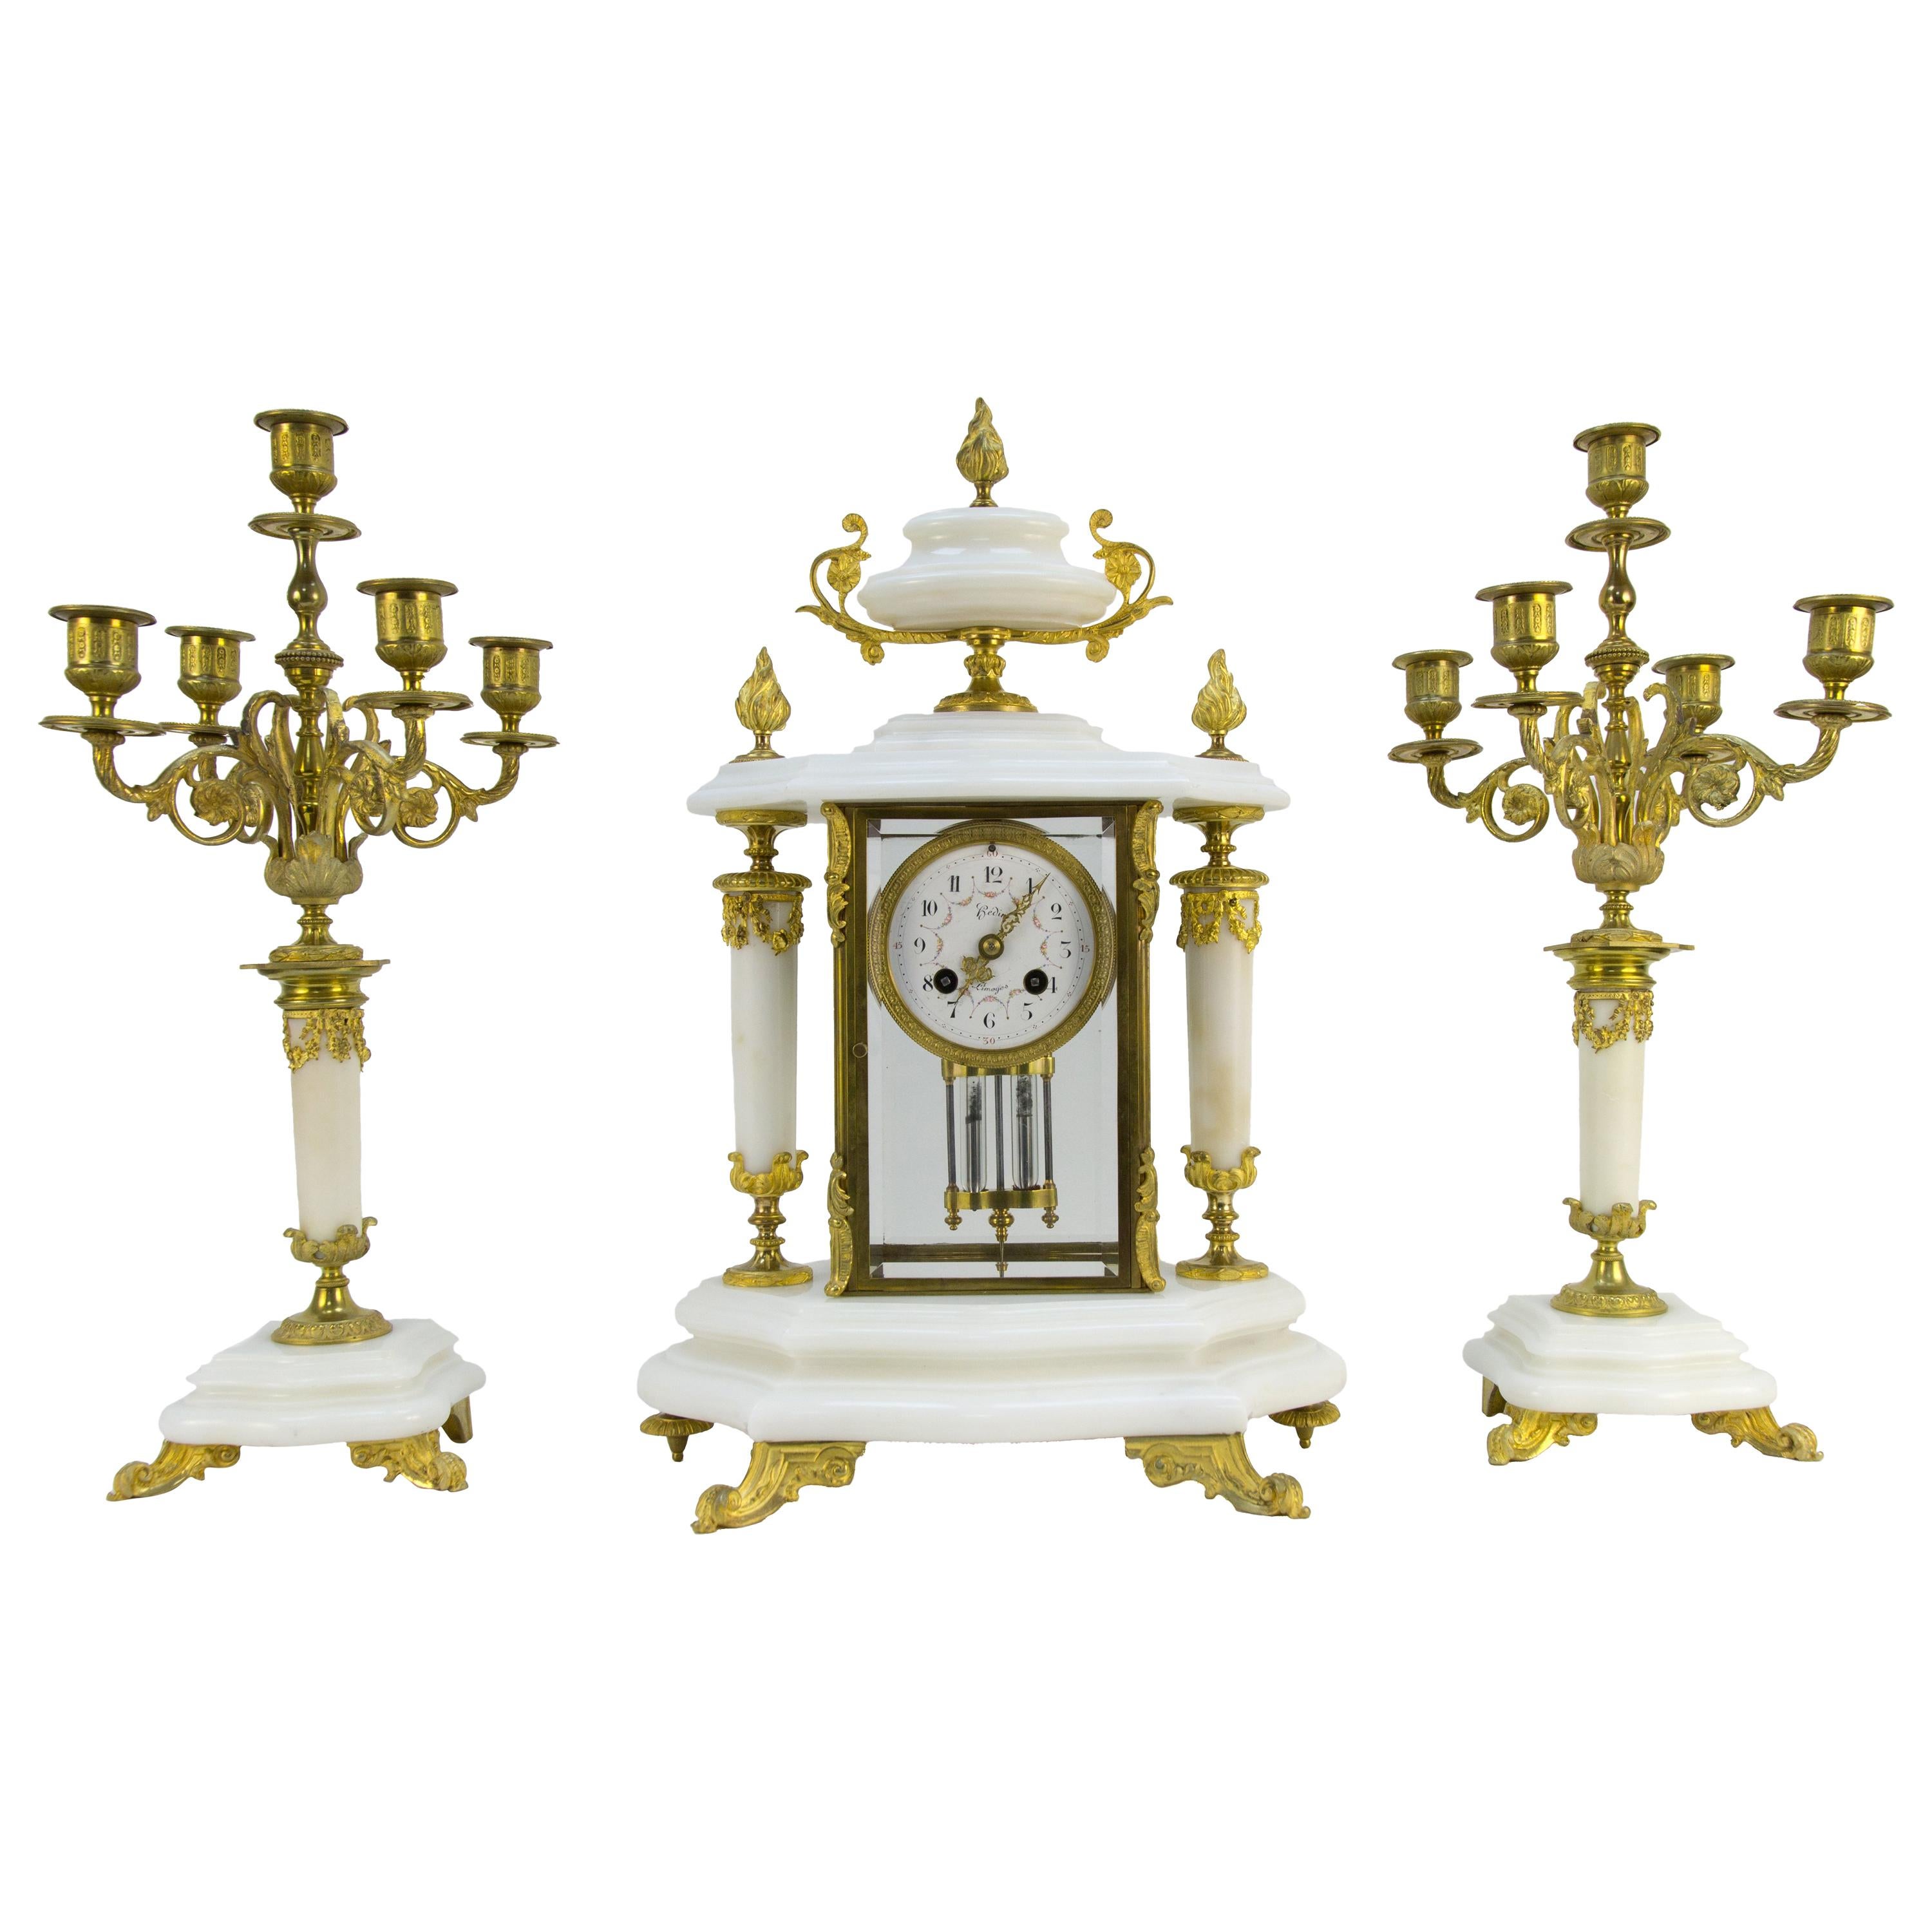 French Ormolu and White Marble Mantel Clock and Candelabra Set by A.D. Mougin